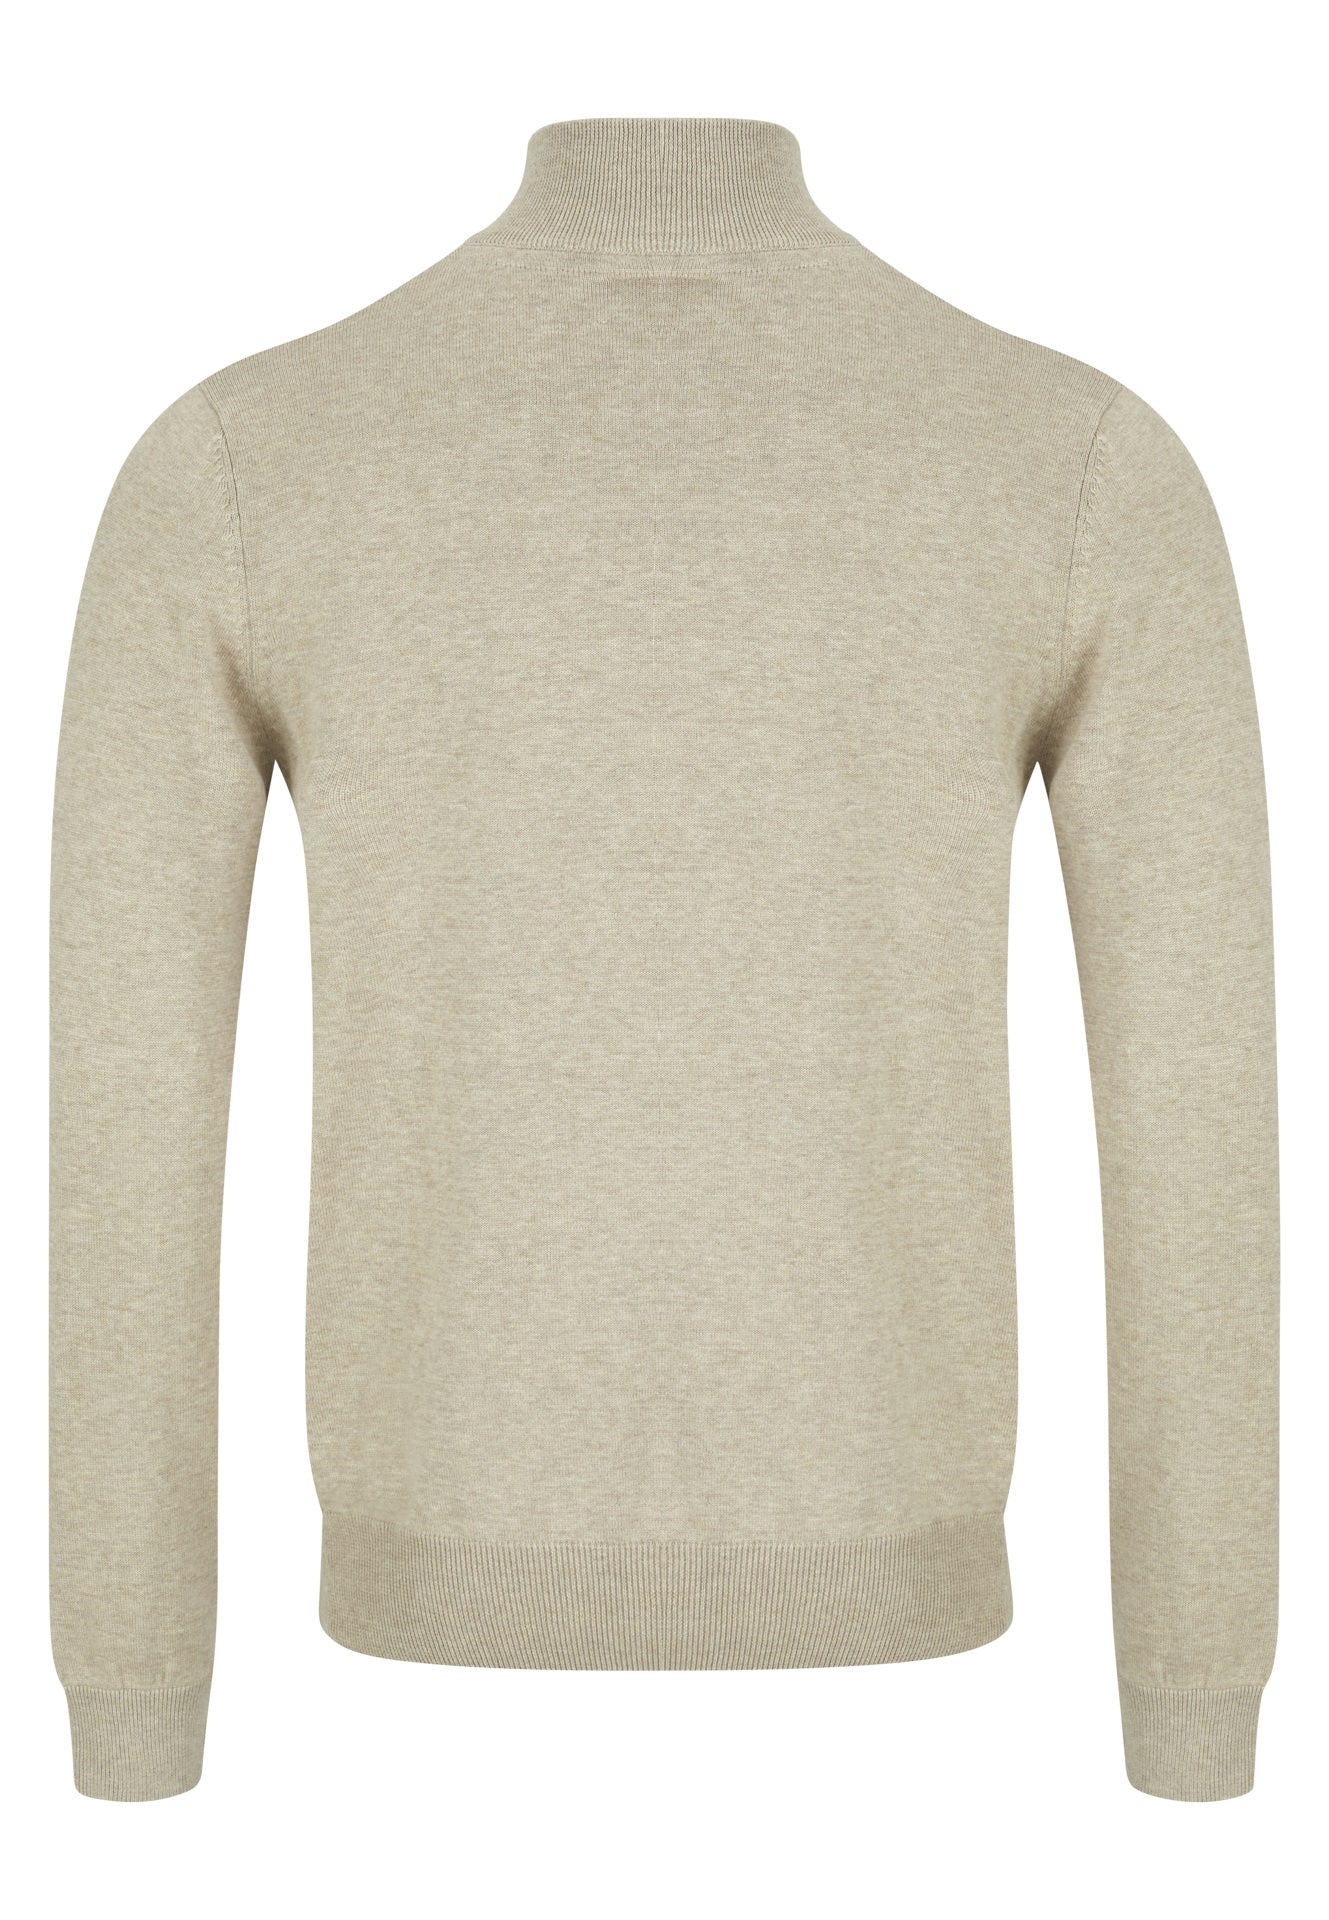 Men's Harry 1/4 Zip - Pussywillow-Back View